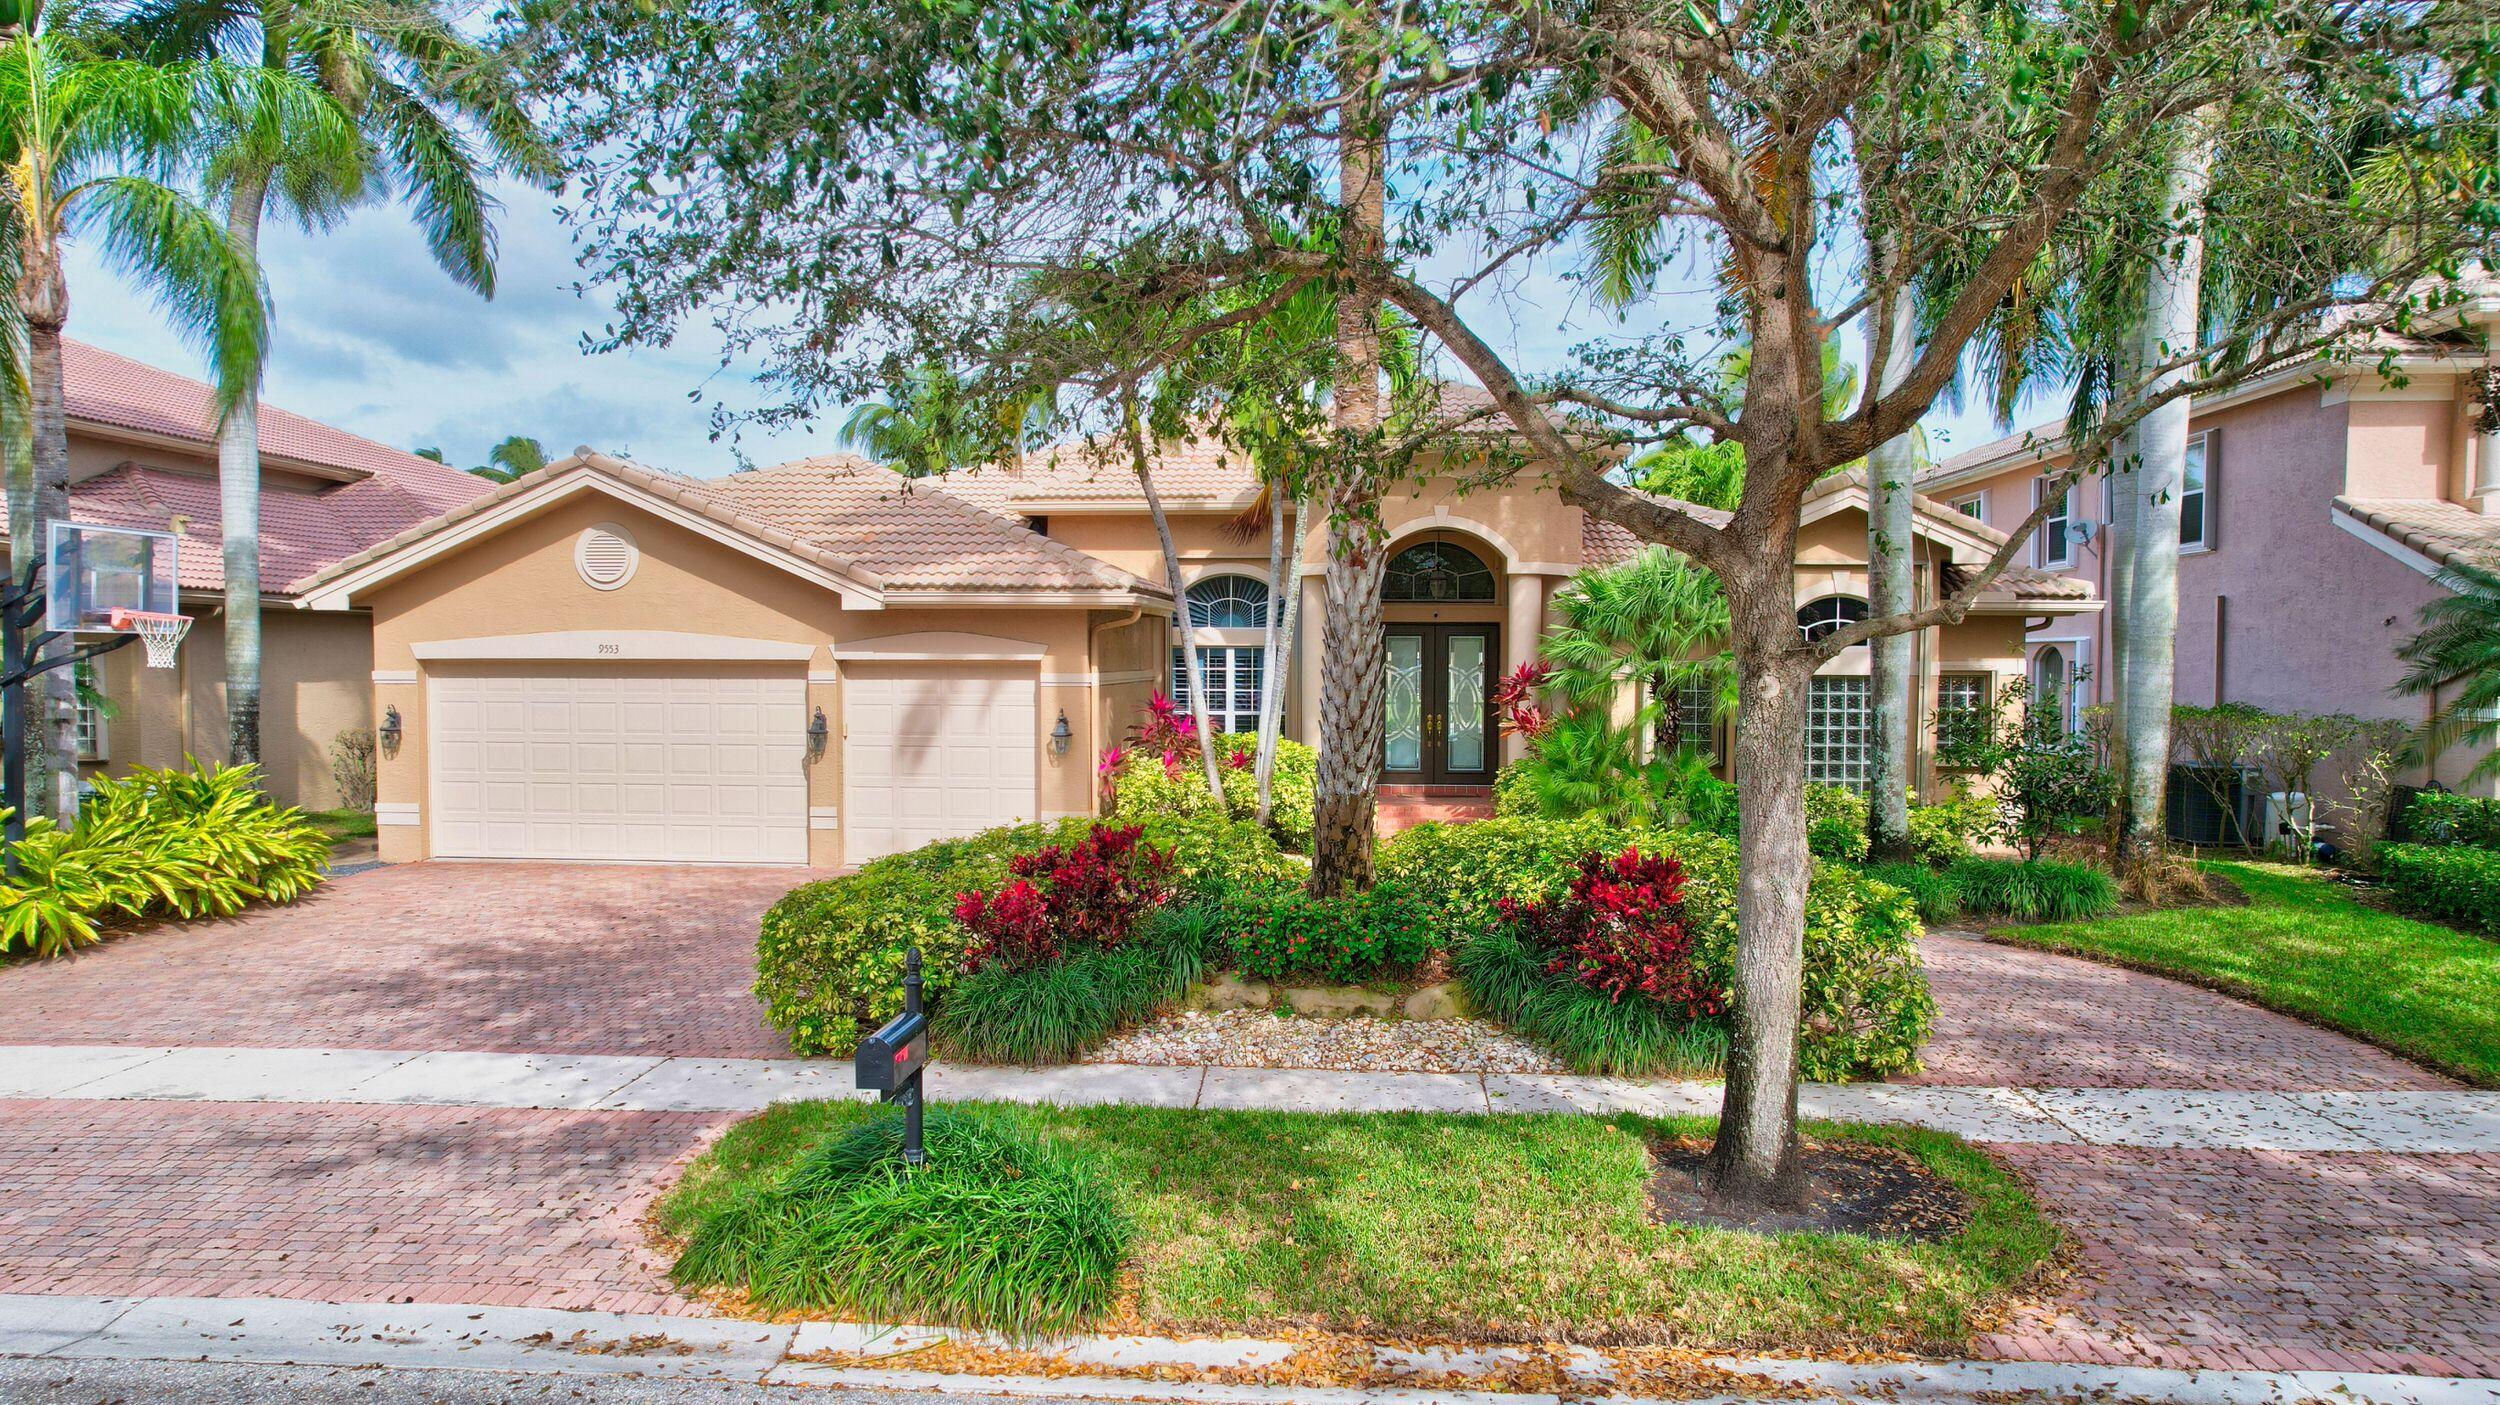 9553 New Waterford Cove, Delray Beach, Palm Beach County, Florida - 5 Bedrooms  
3 Bathrooms - 